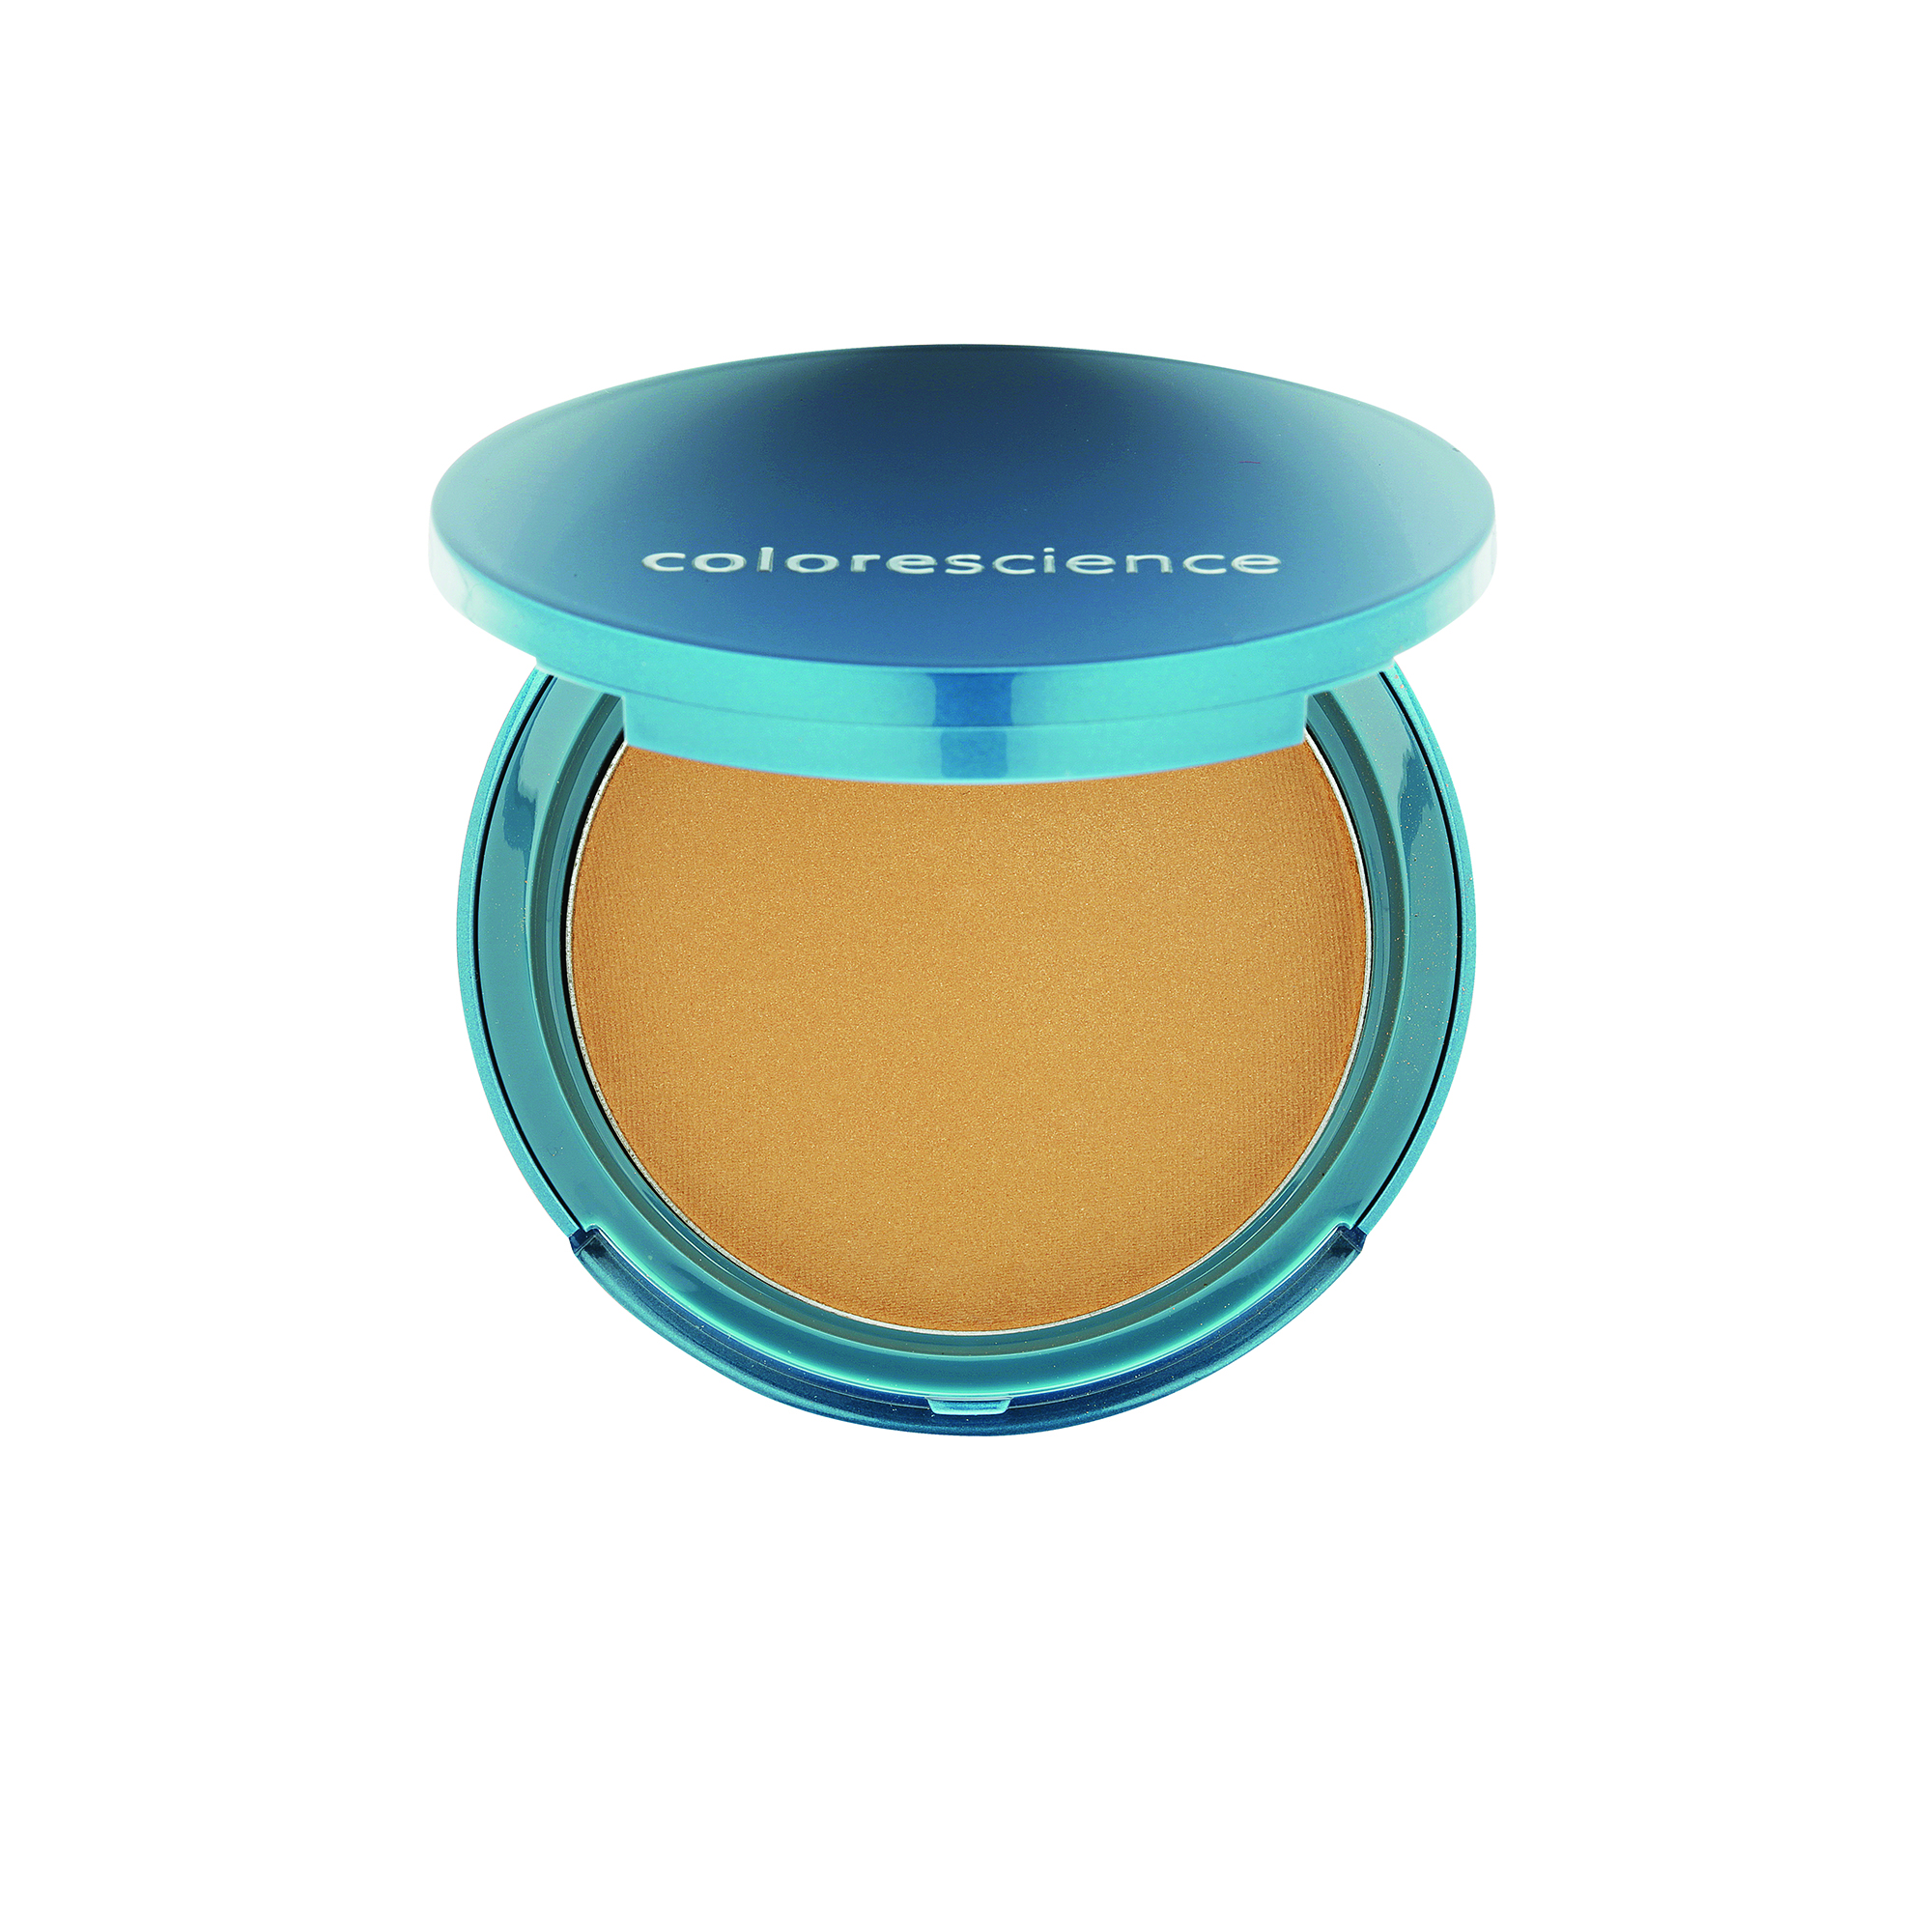 Colorescience Pressed Mineral Foundation Tan Natural